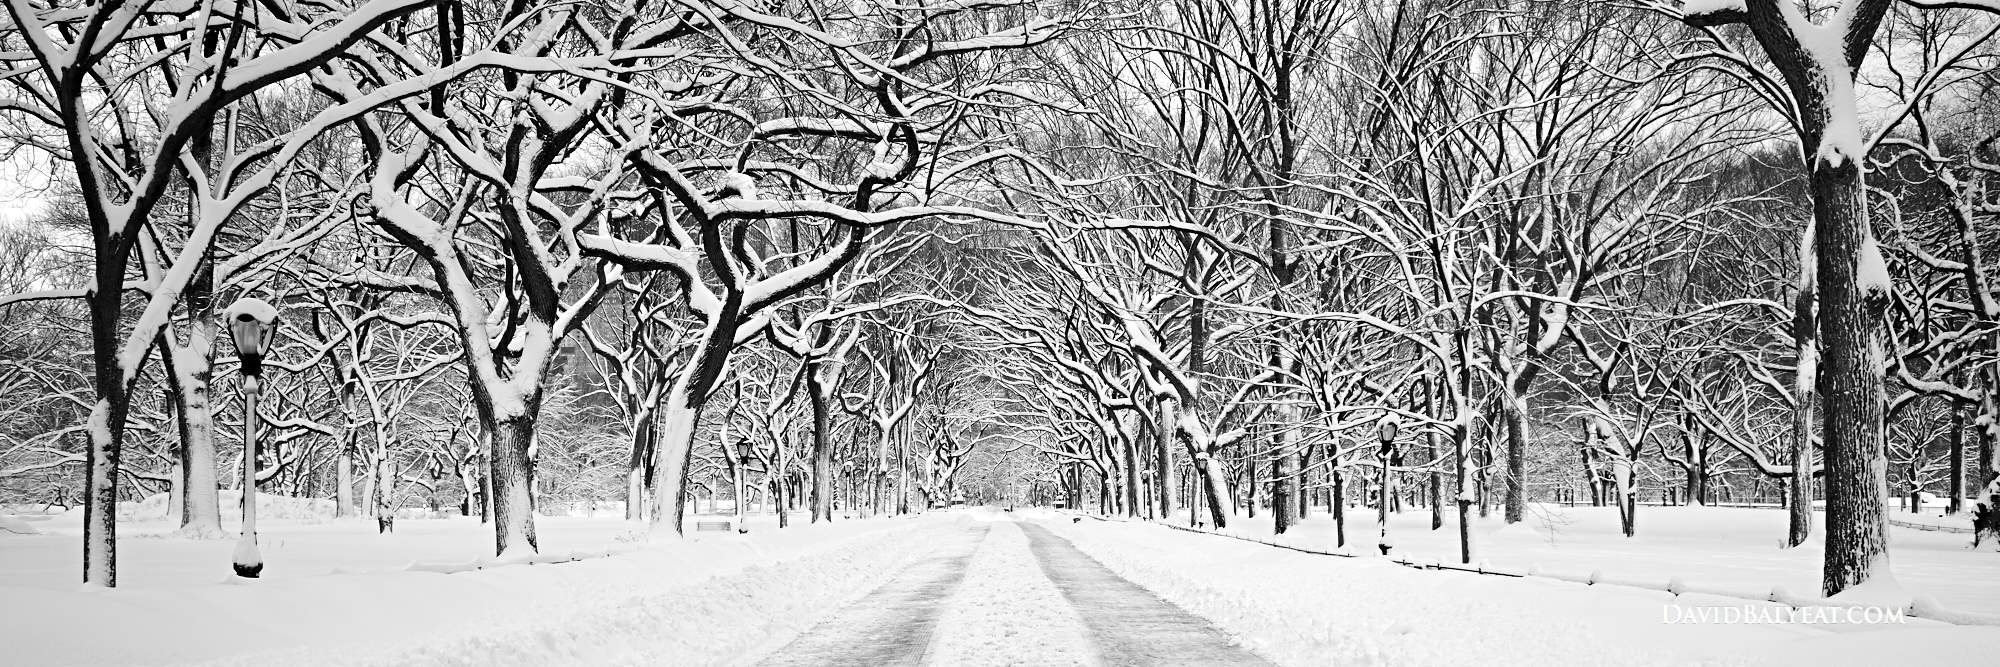 central-park-snow-literary-walk-mall-black-and-white-panoramic-high-definition-hd-professional-photography.jpg